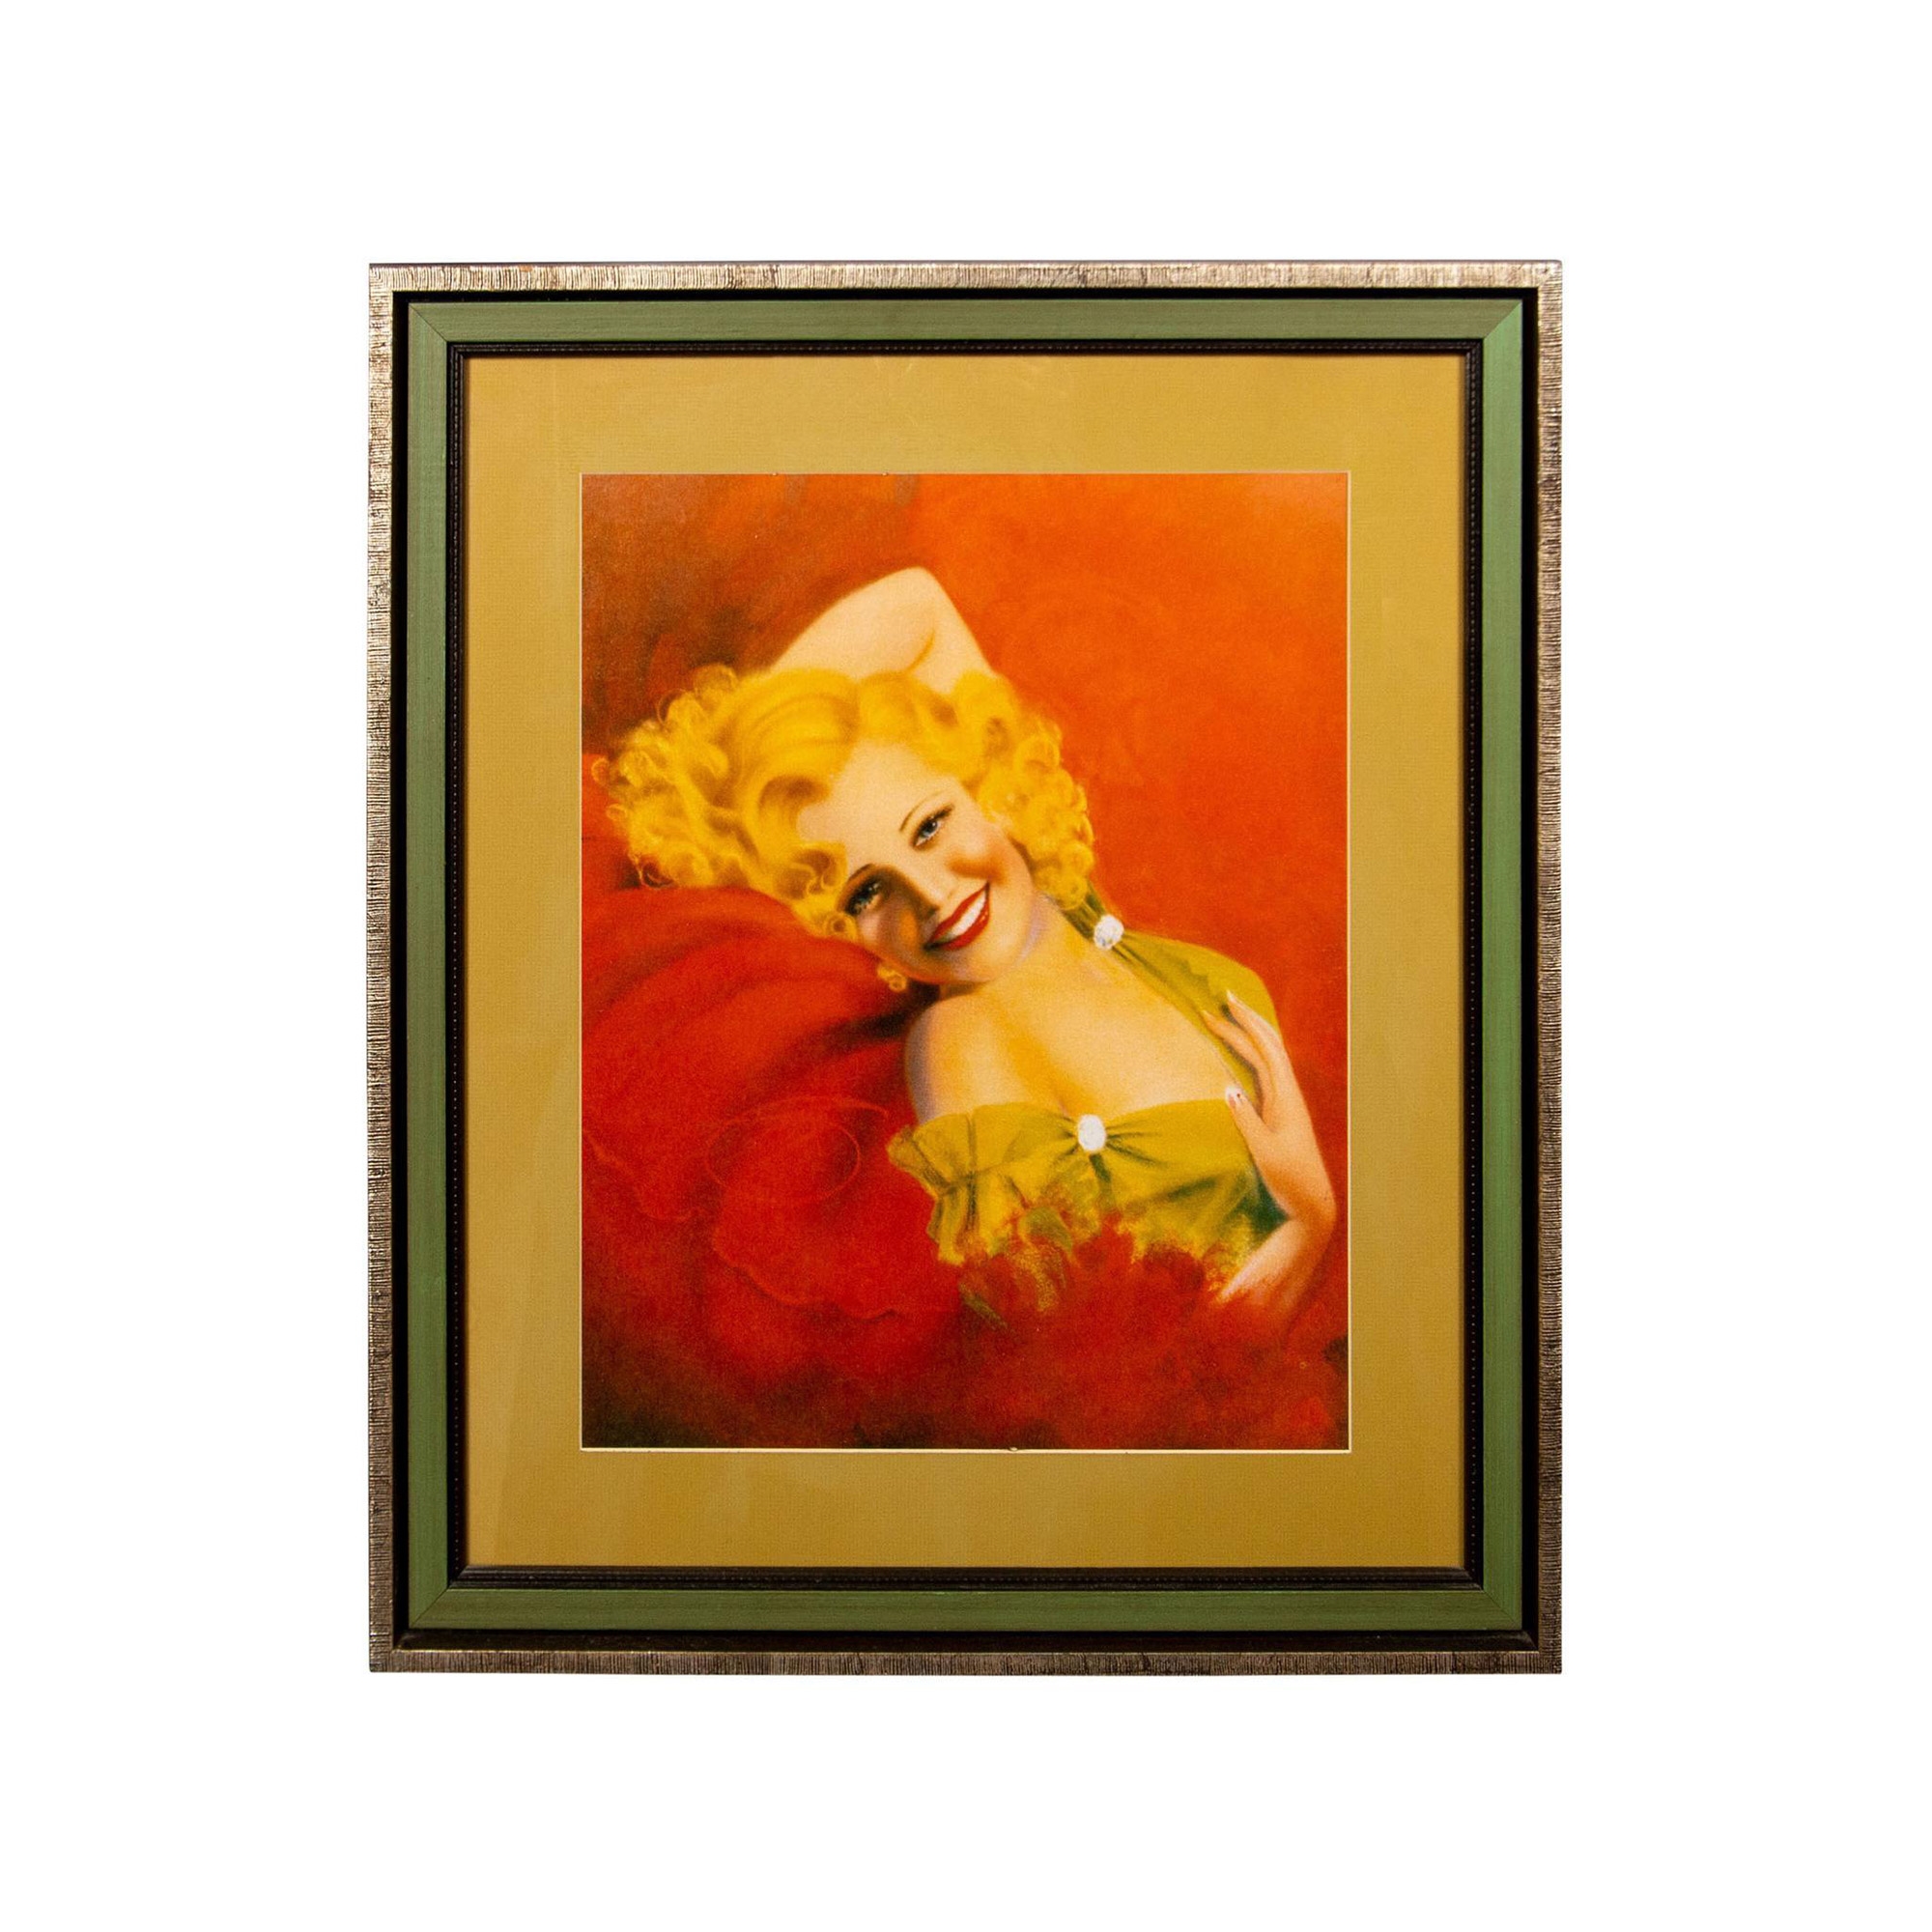 Rolf Armstrong (American 1889-1960) Framed Fine Art Print - Rolf Armstrong